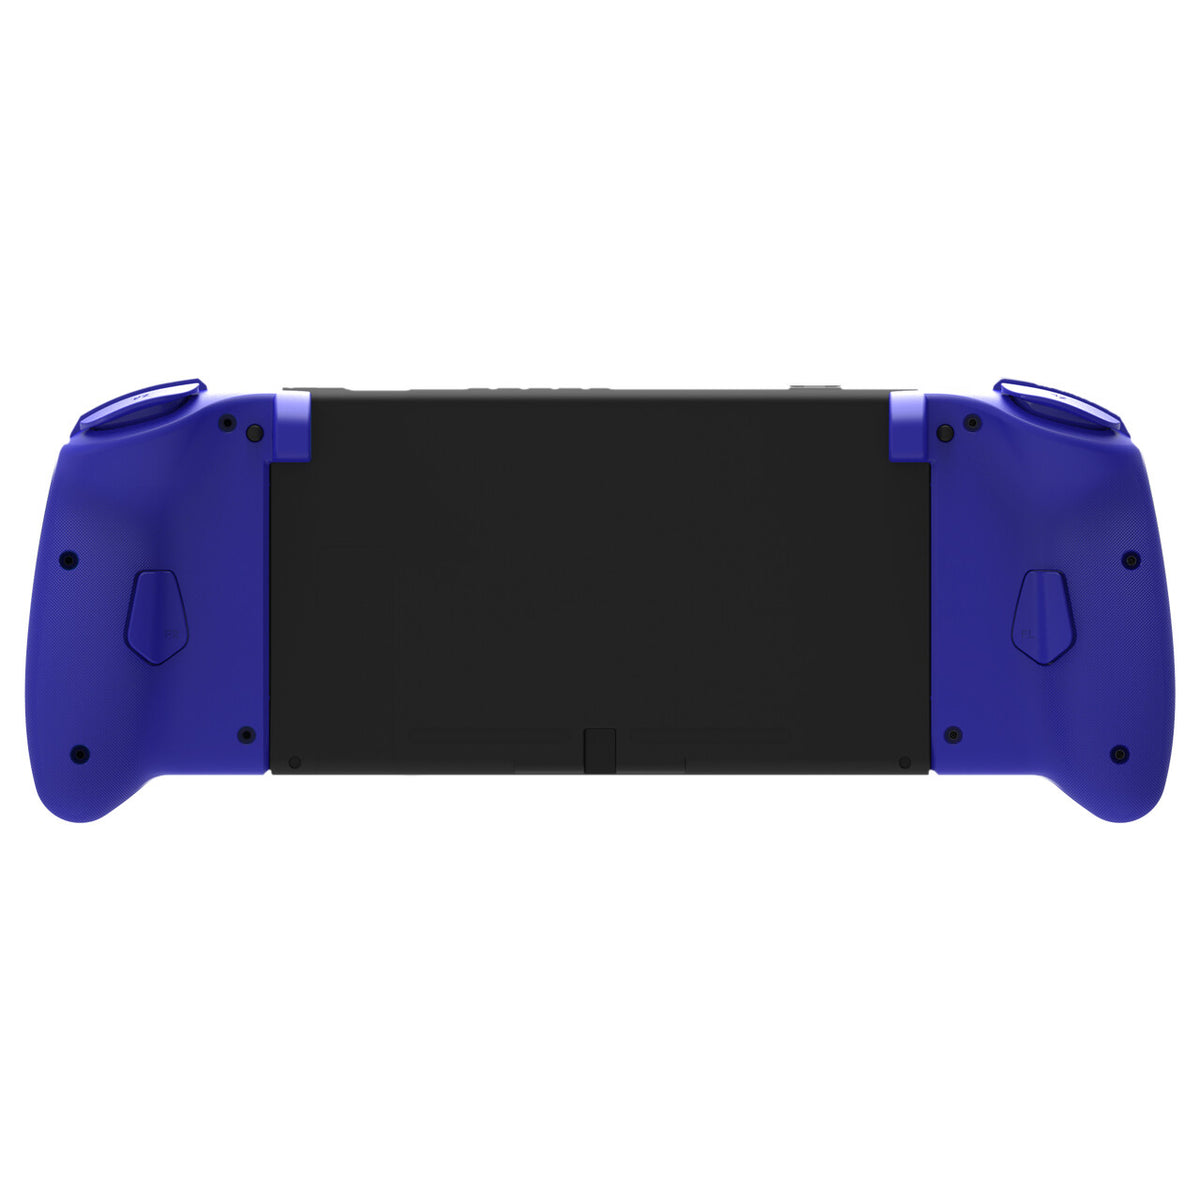 Hori Split Pad Pro -  Game Controllers for Nintendo Switch - Sonic The Hedgehog Edition